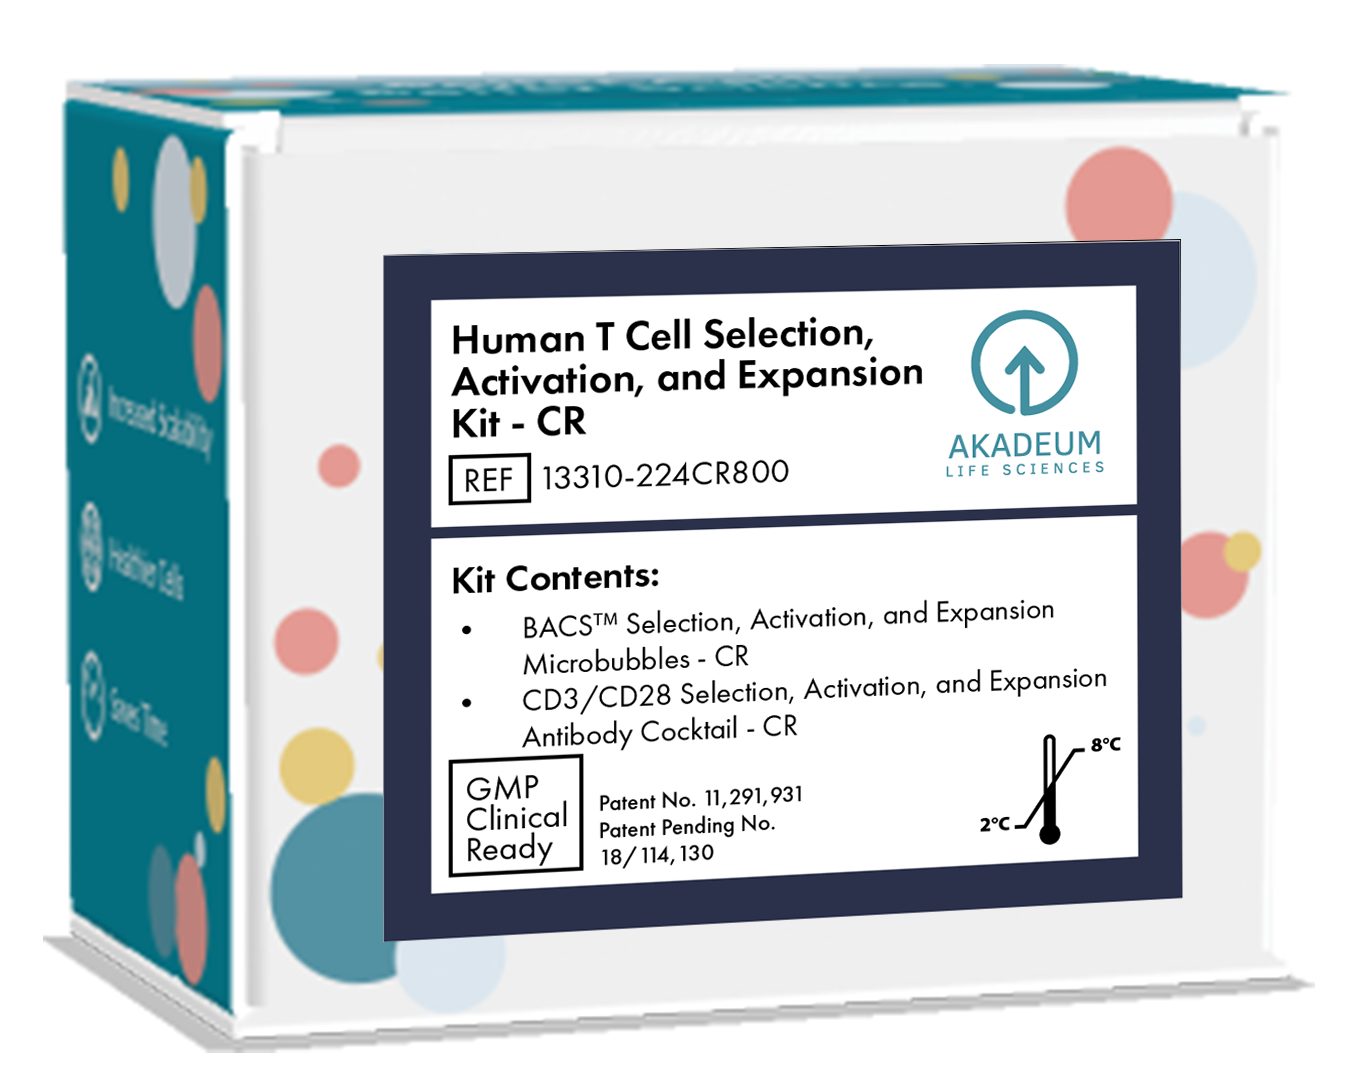 Human T Cell Selection, Activation, and Expansion Kit - CR